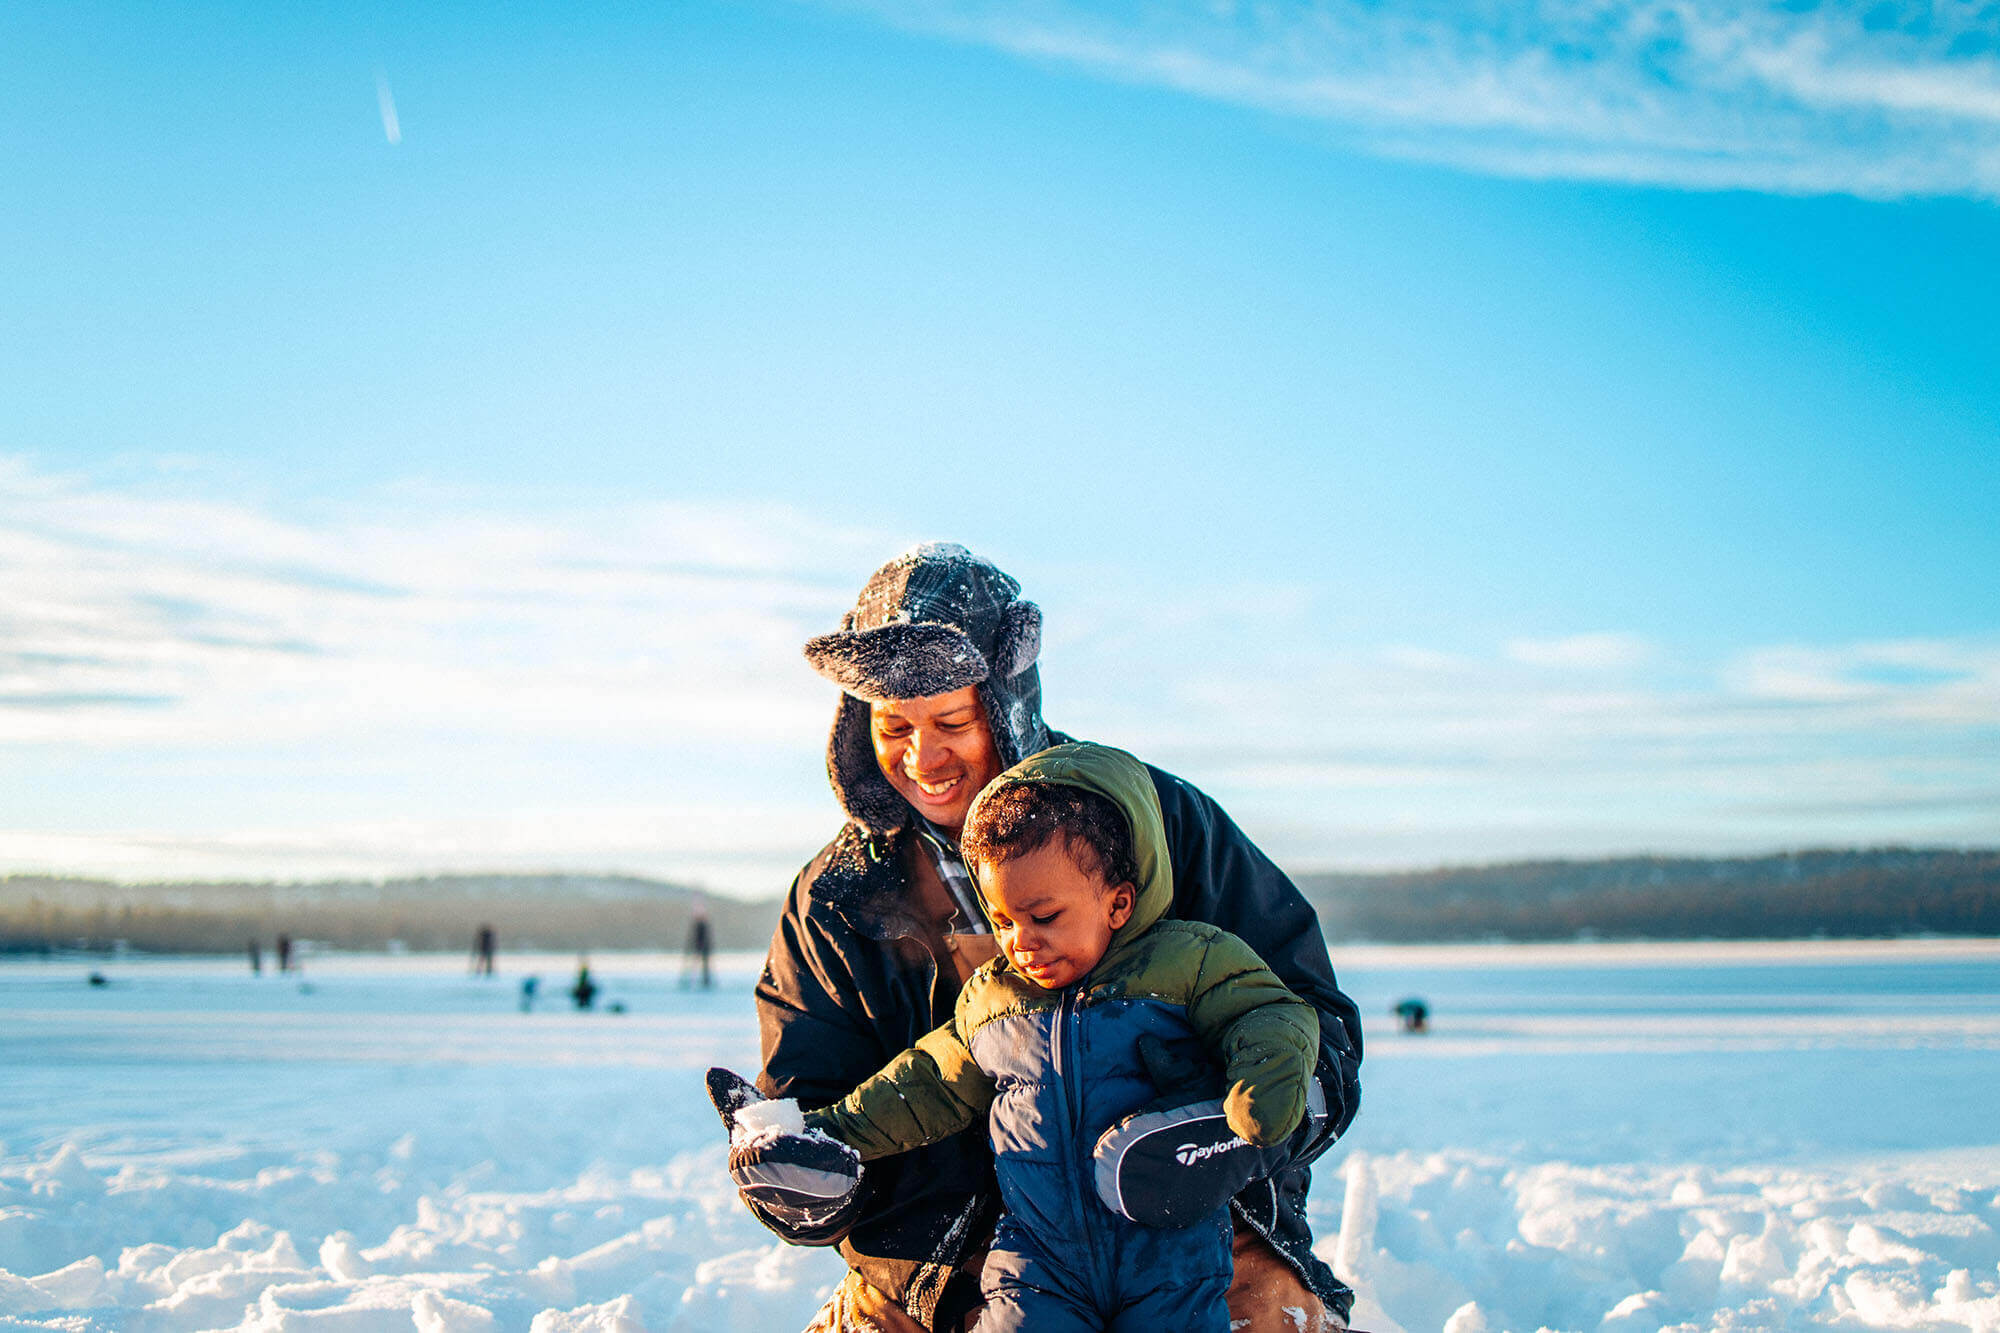 A person and child in cold weather gear play in the snow on Payette Lake under a blue sky.